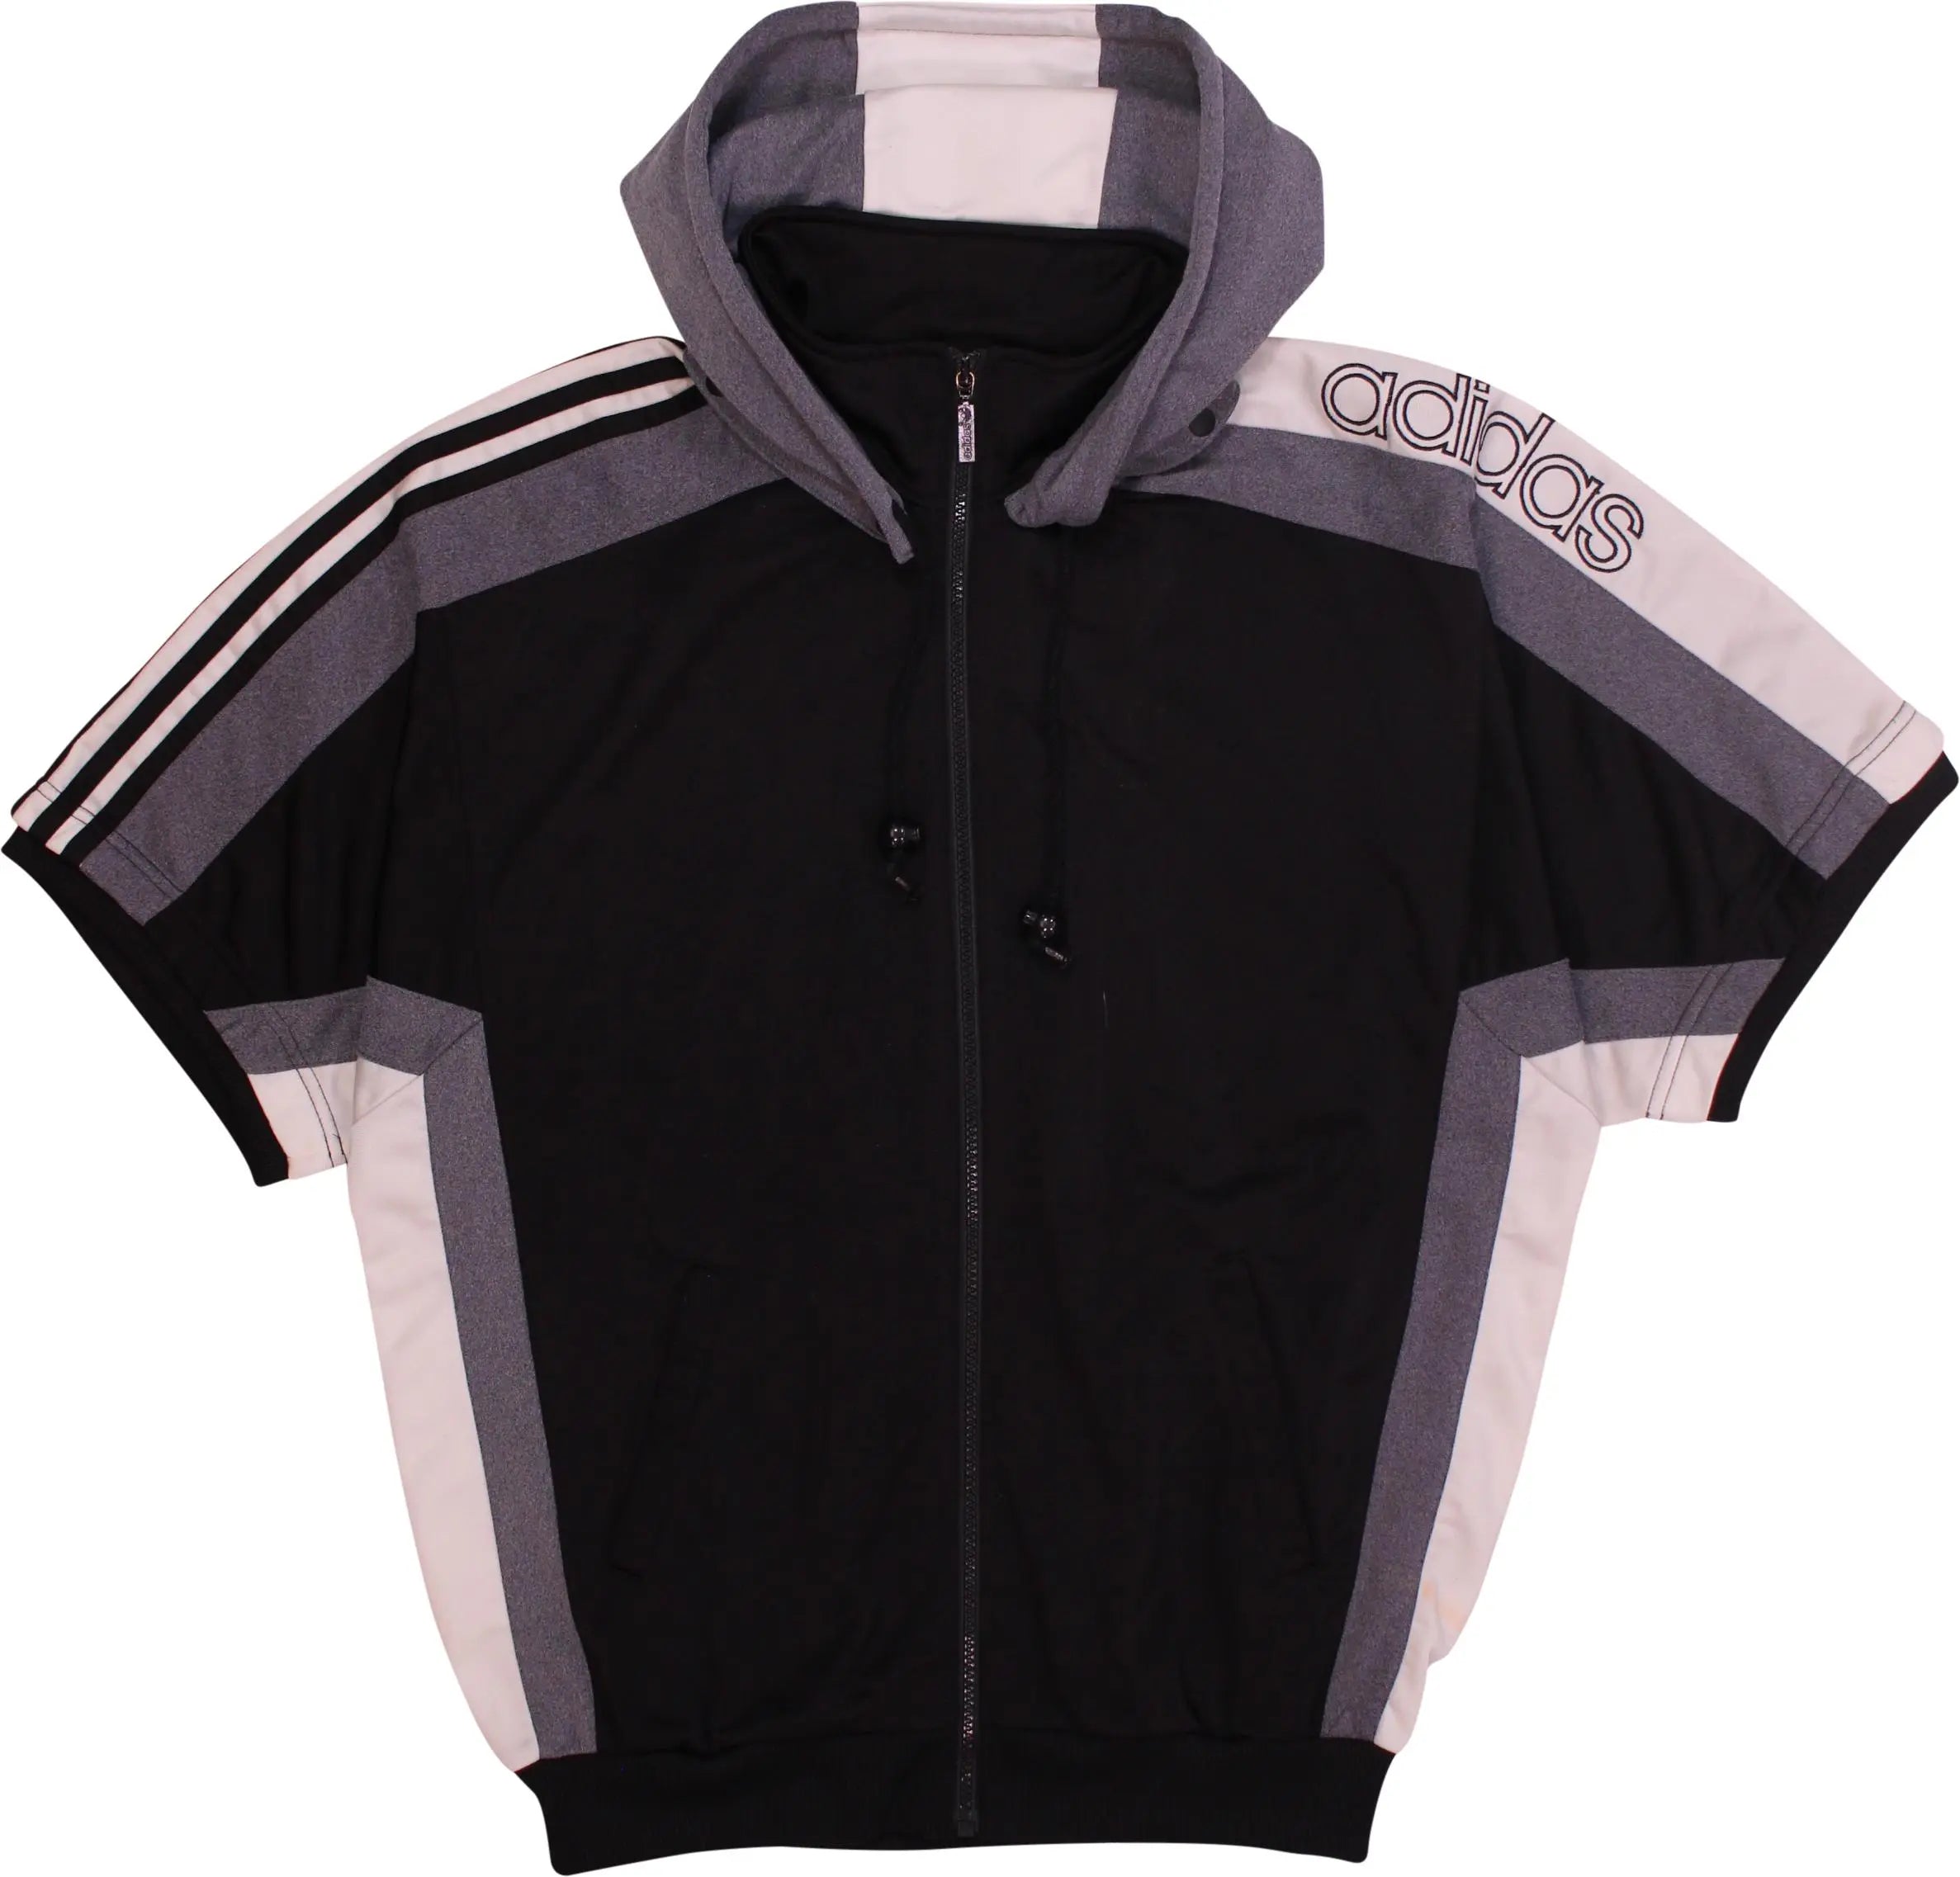 Adidas - 90s Short Sleeve Track Jacket by Adidas- ThriftTale.com - Vintage and second handclothing